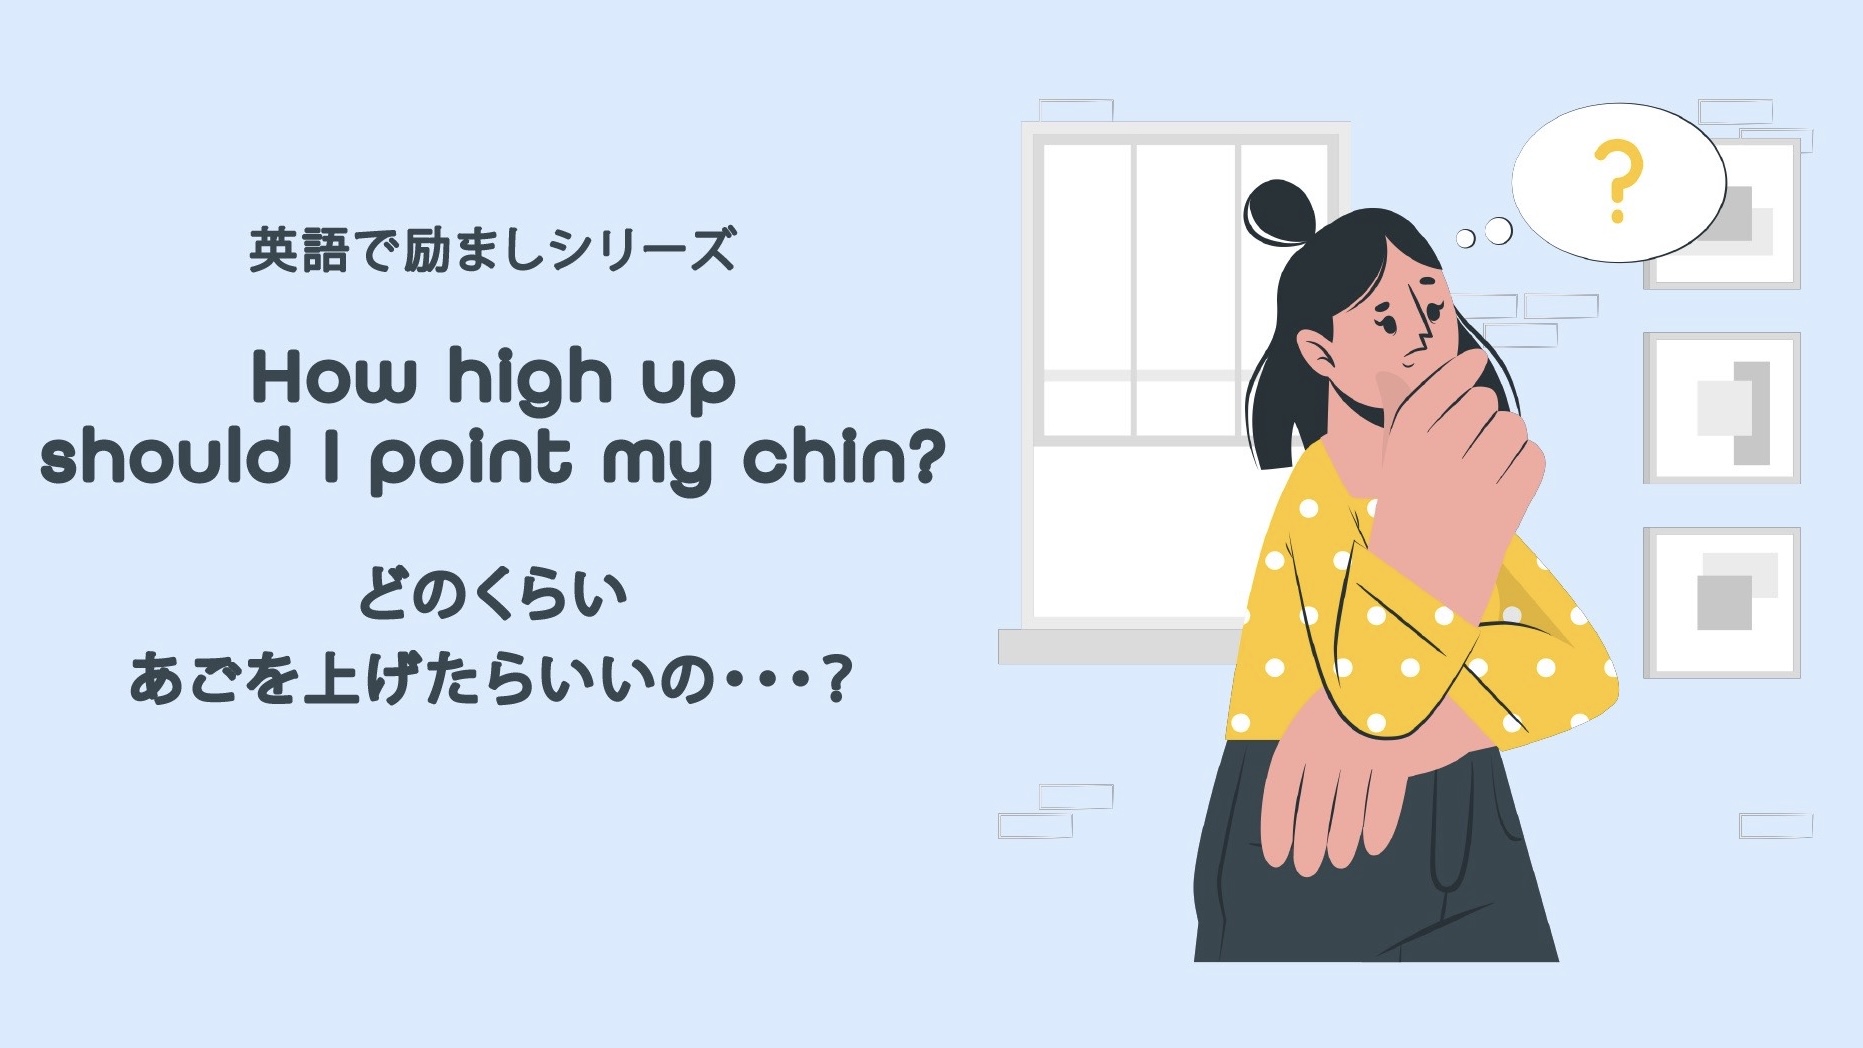 How high up should I point my chin? どのくらいあごを上げたらいいの・・・？